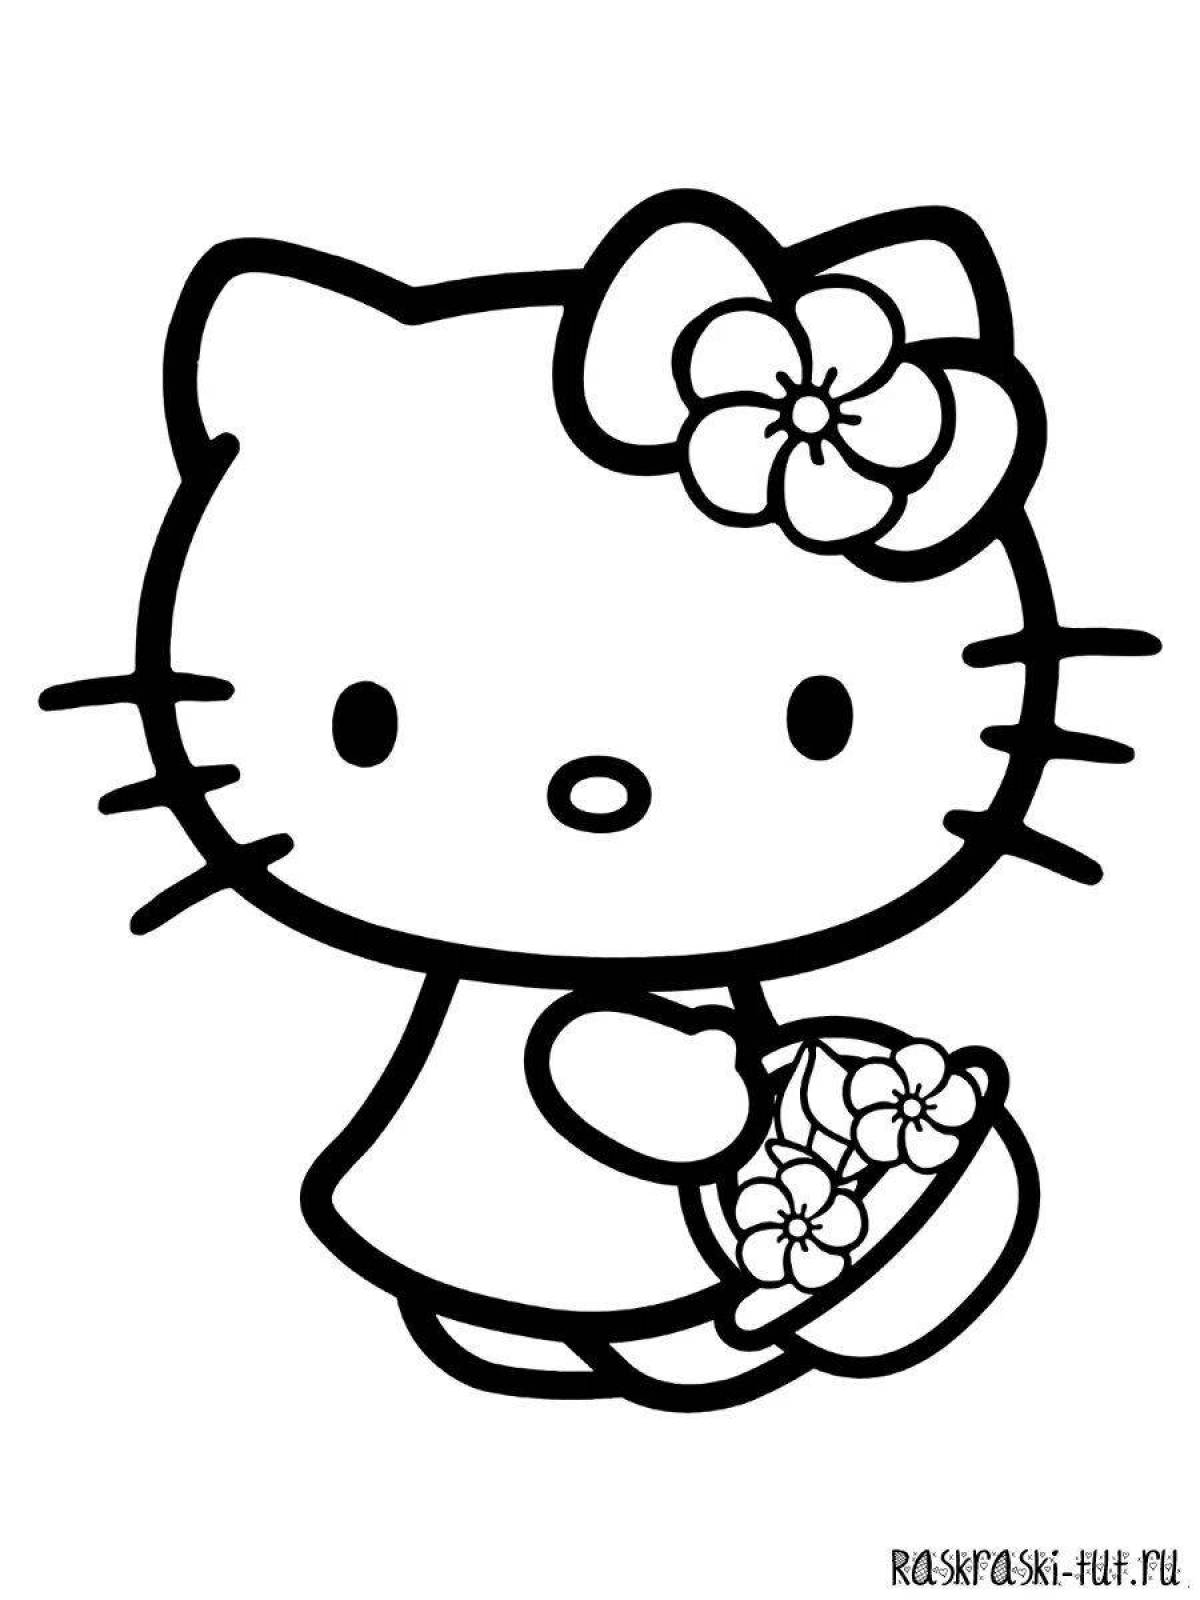 Curious kitty cat coloring book